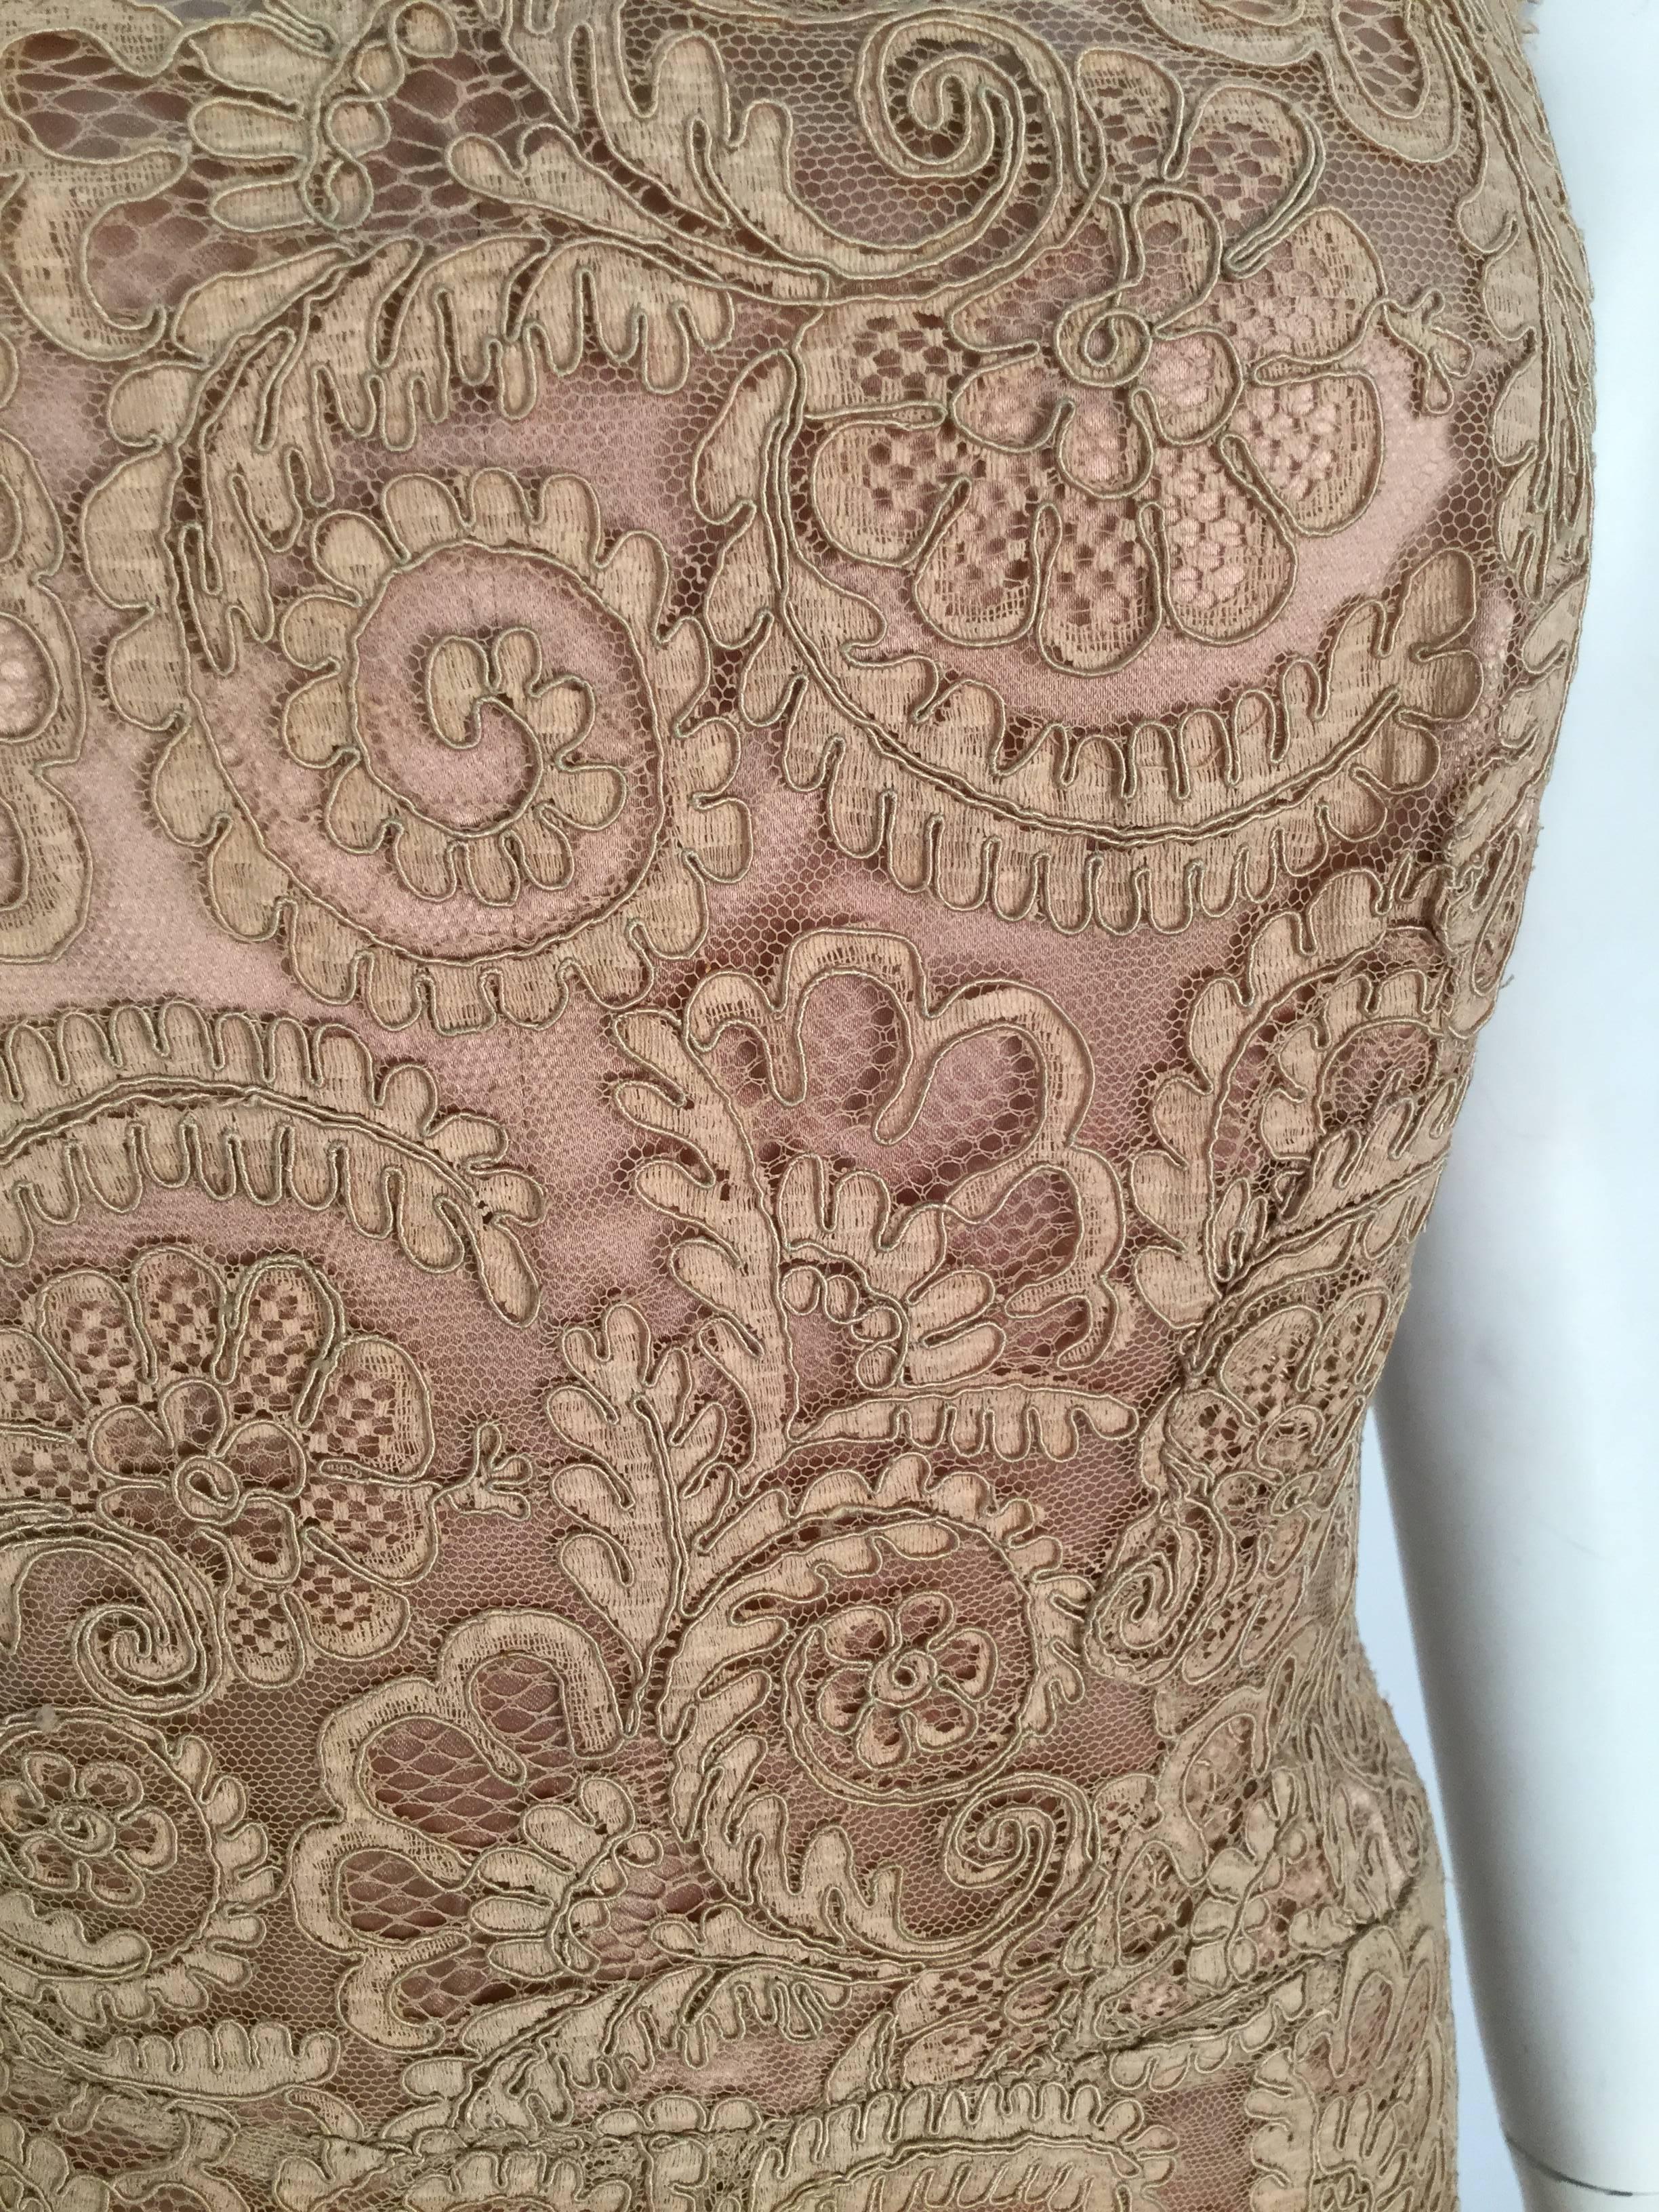 Elegant nude strapless Venetian lace floor length evening gown.  Couture quality craftsmanship, perfect fit and wonderfully preservation. 

Subtle and simple fit and flare silhouette but with fine venetian lace.

Bodice has boning for support.